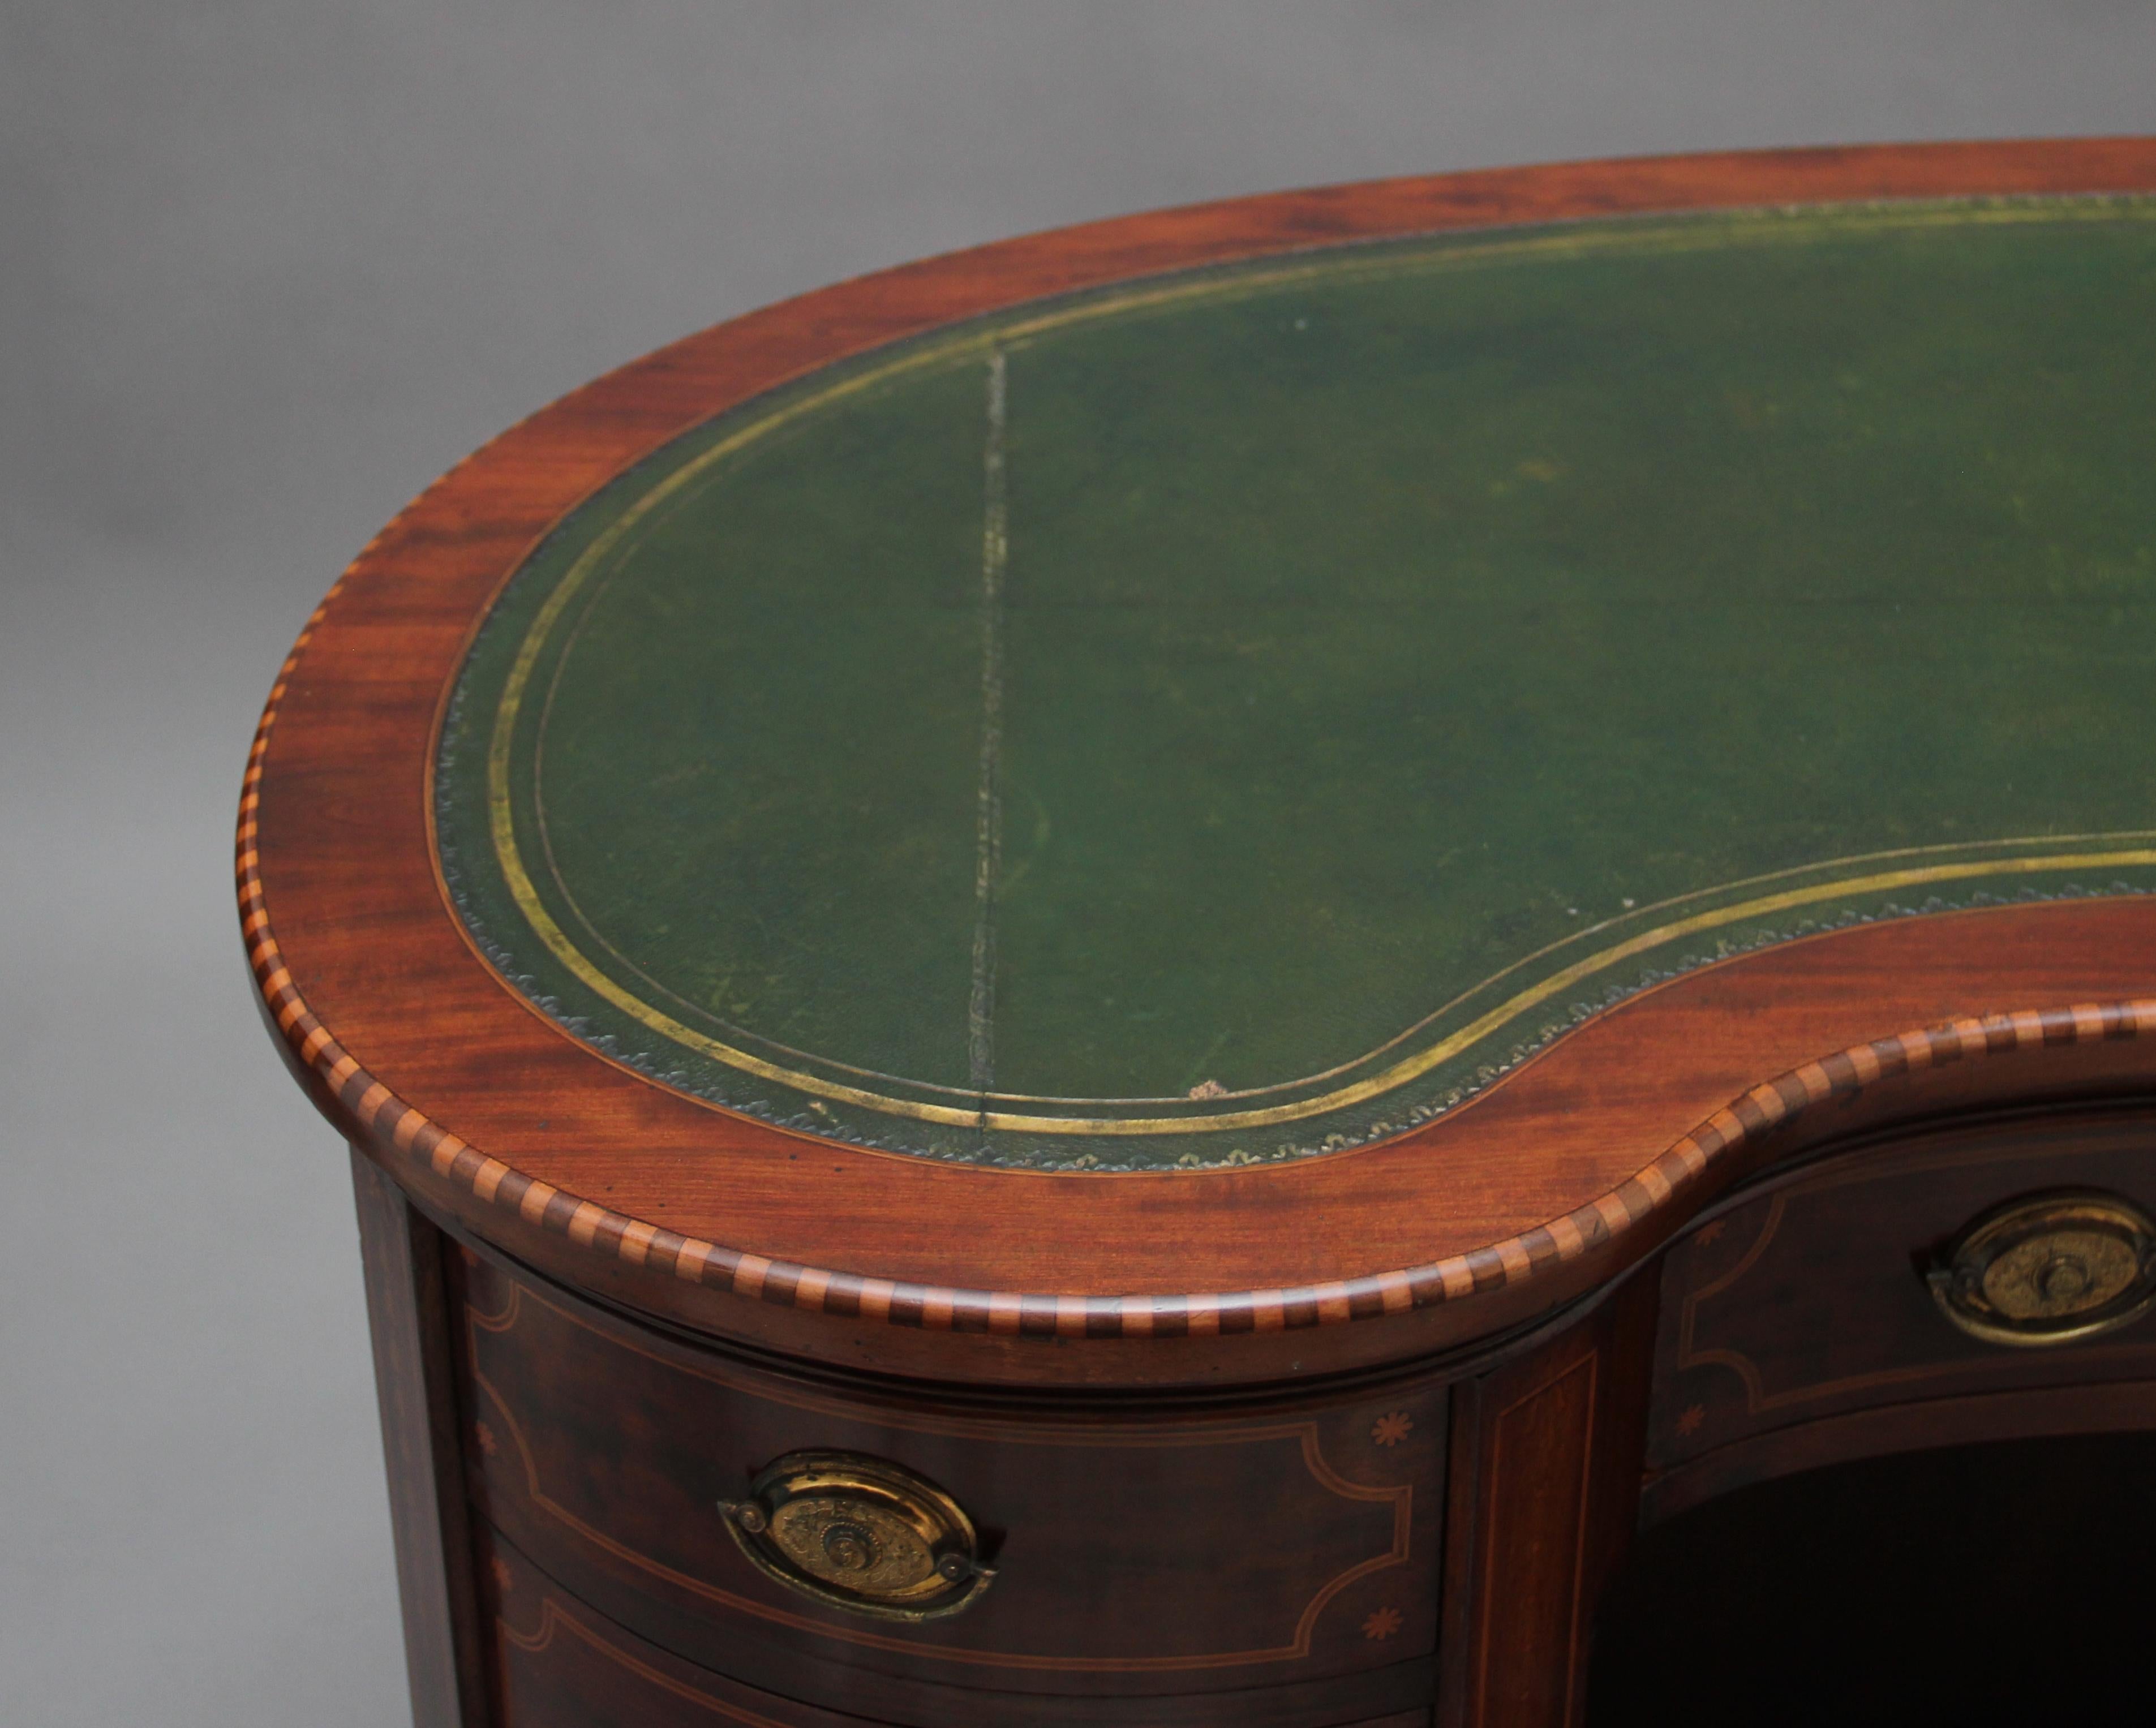 Late 19th Century 19th Century Inlaid Mahogany Kidney Shaped Desk with a Wonderful Provenance